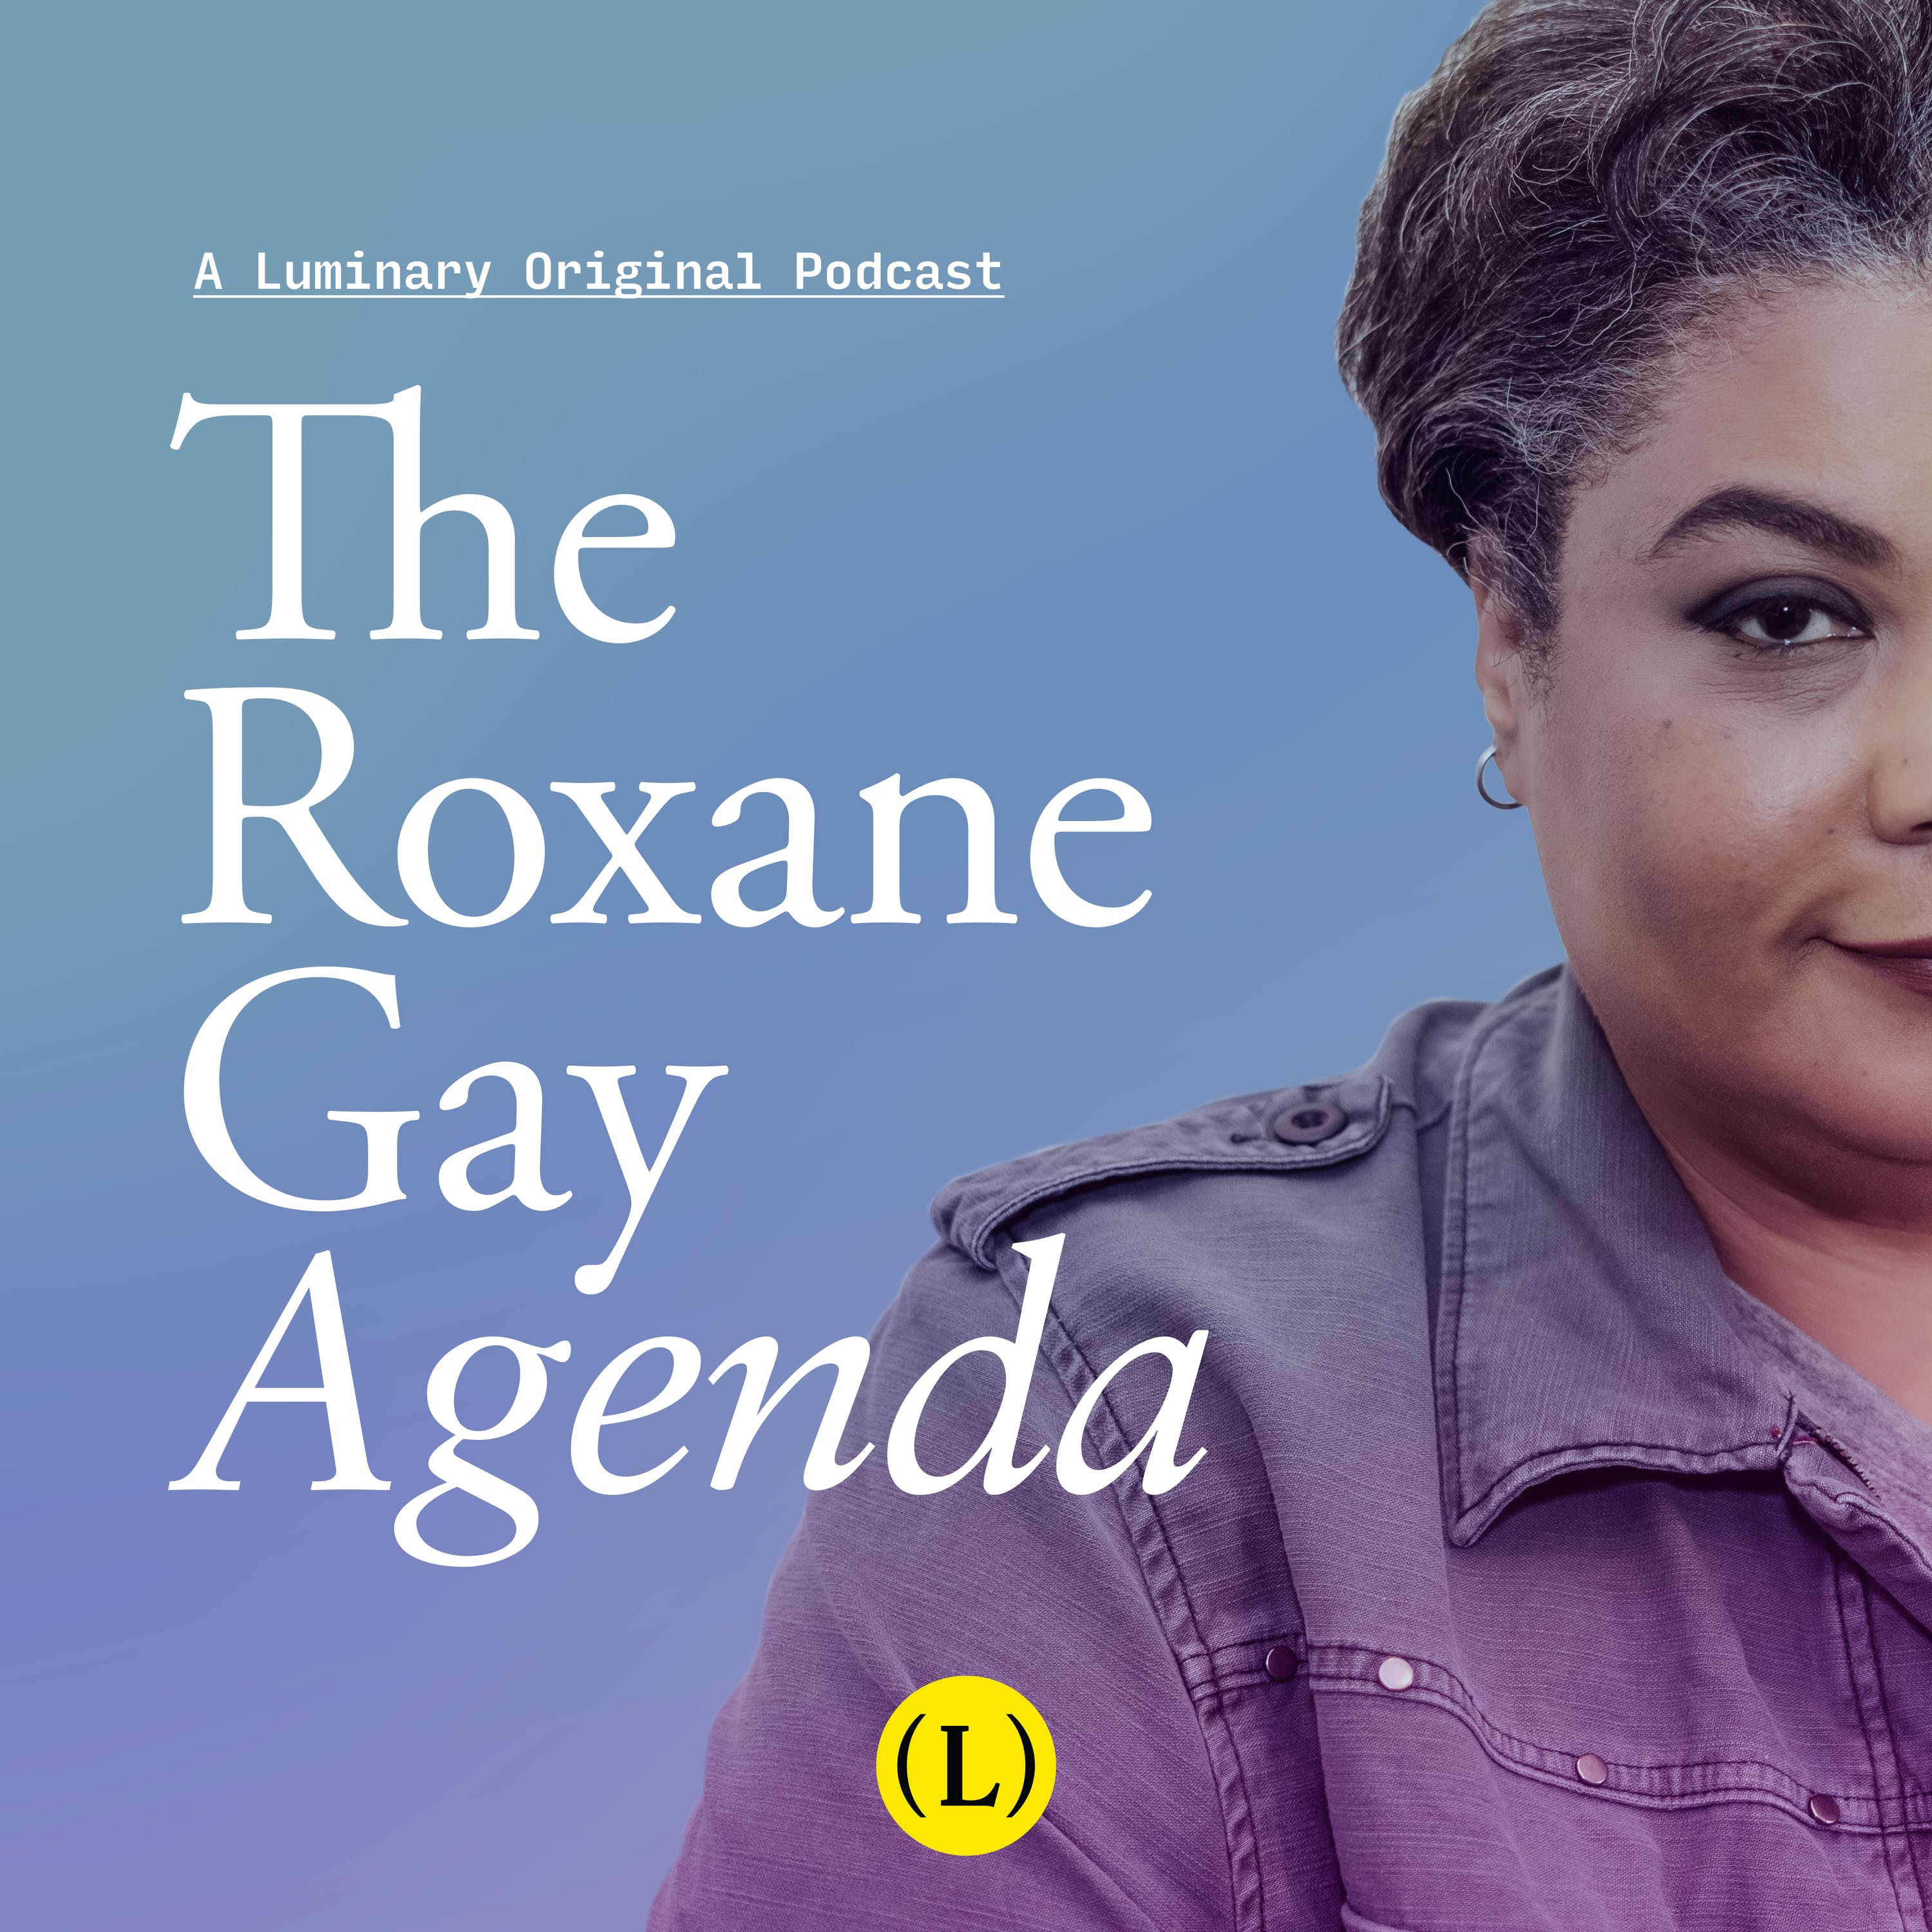 Hear to Slay: The Fat Tax (with Sabrina Strings, and Sonya Renee Taylor)